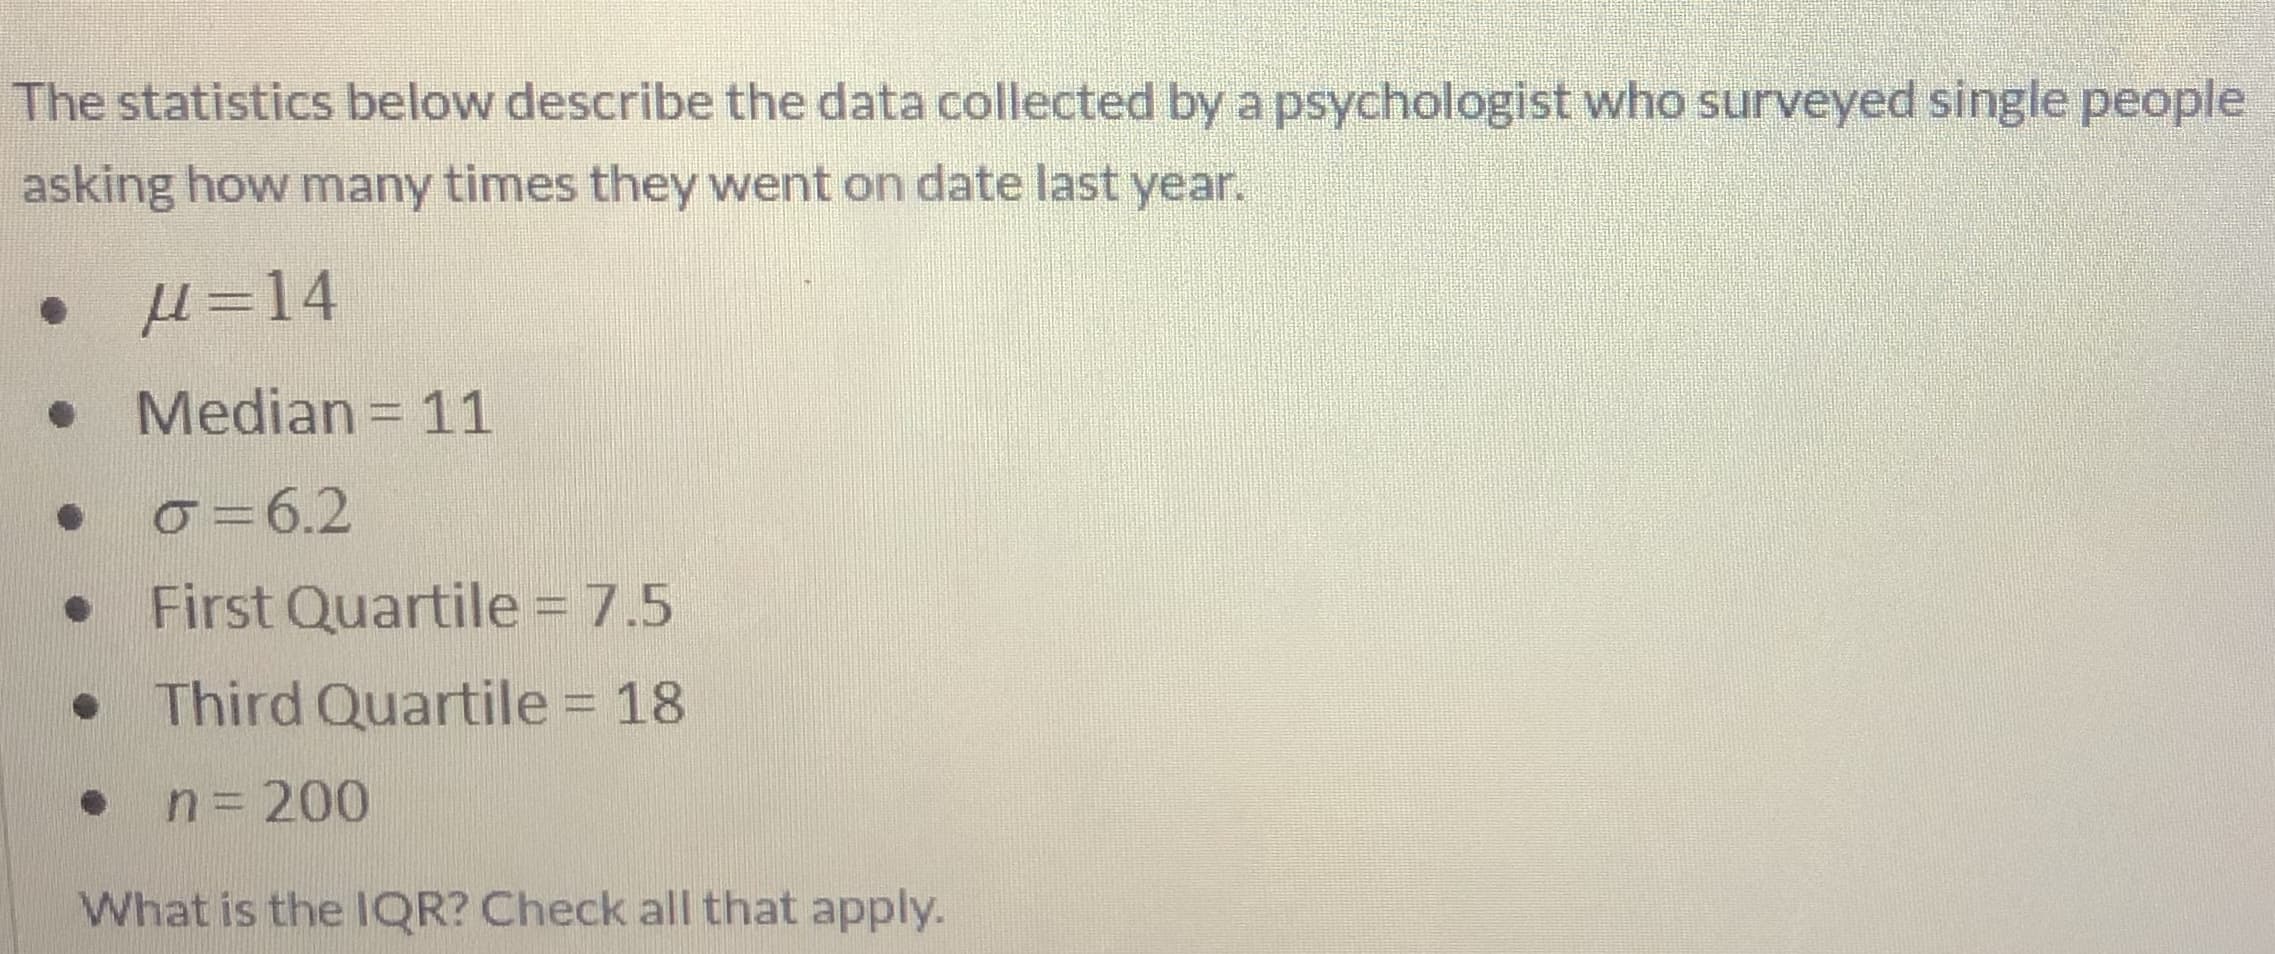 The statistics below describe the data collected by a psychologist who surveyed single people
asking how many times they went on date last year.
µ =14
Median= 11
o =6.2
First Quartile = 7.5
• Third Quartile = 18
n= 200
What is the 1QR? Check all that apply.
